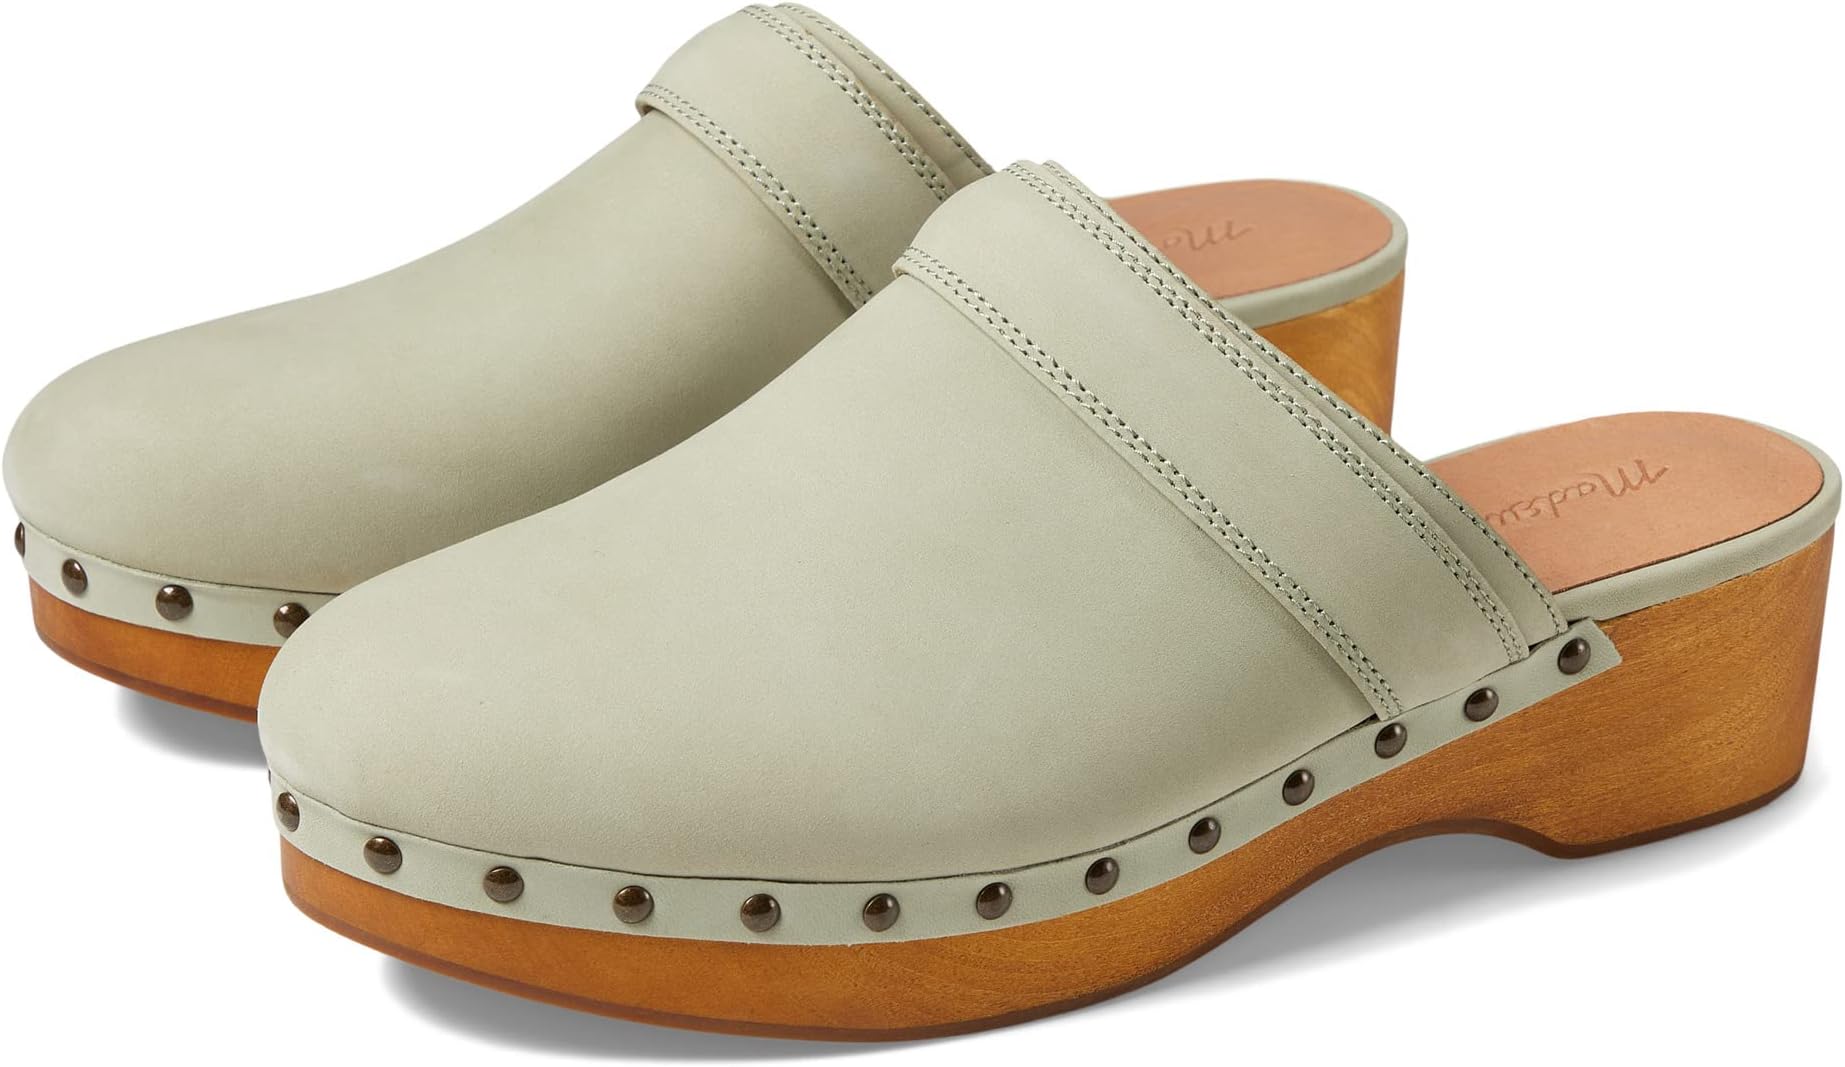 Сабо The Cecily Clog in Nubuck Madewell, цвет Forgotten Landscape sketch landscape